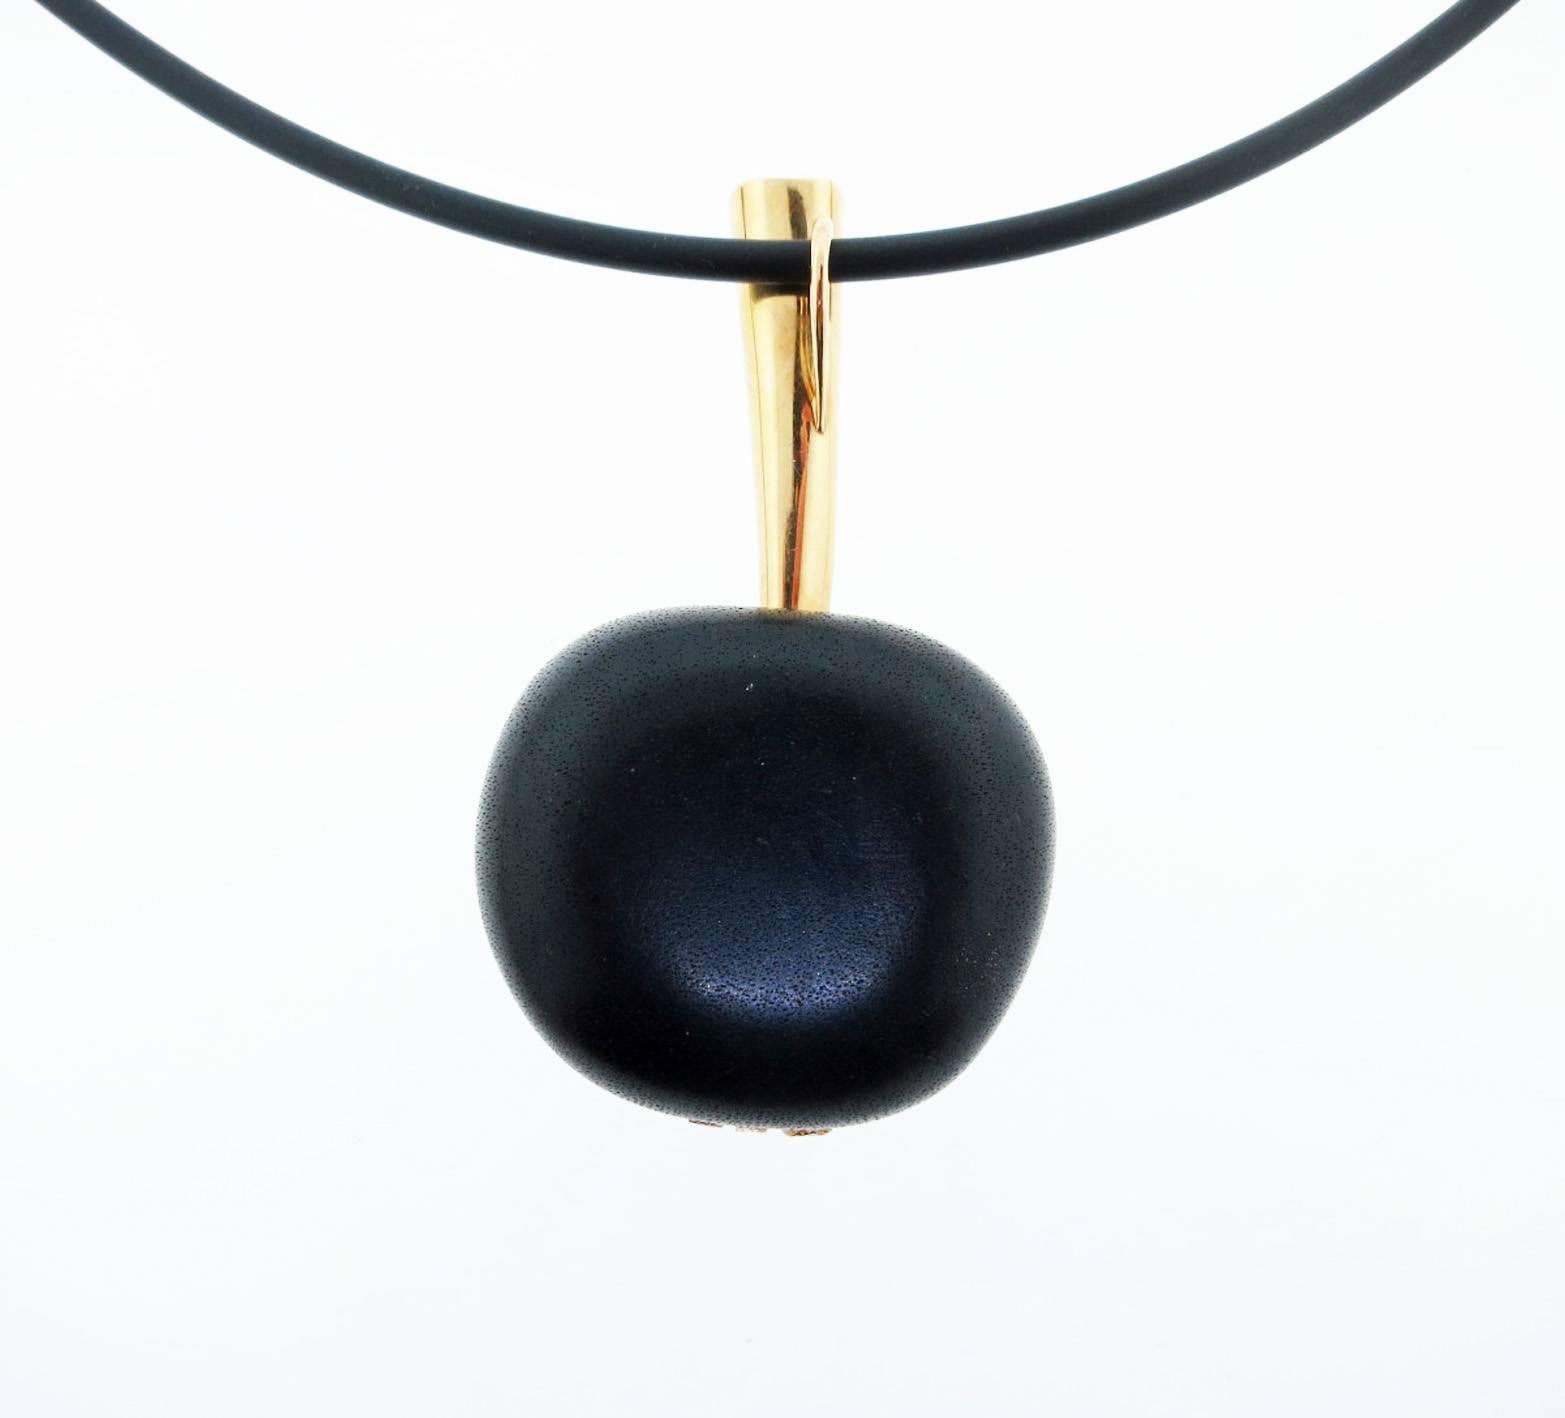 18 Karat Artisan Apple of Wood Bone and Onyx Pendant Necklace In Excellent Condition For Sale In Lambertville, NJ